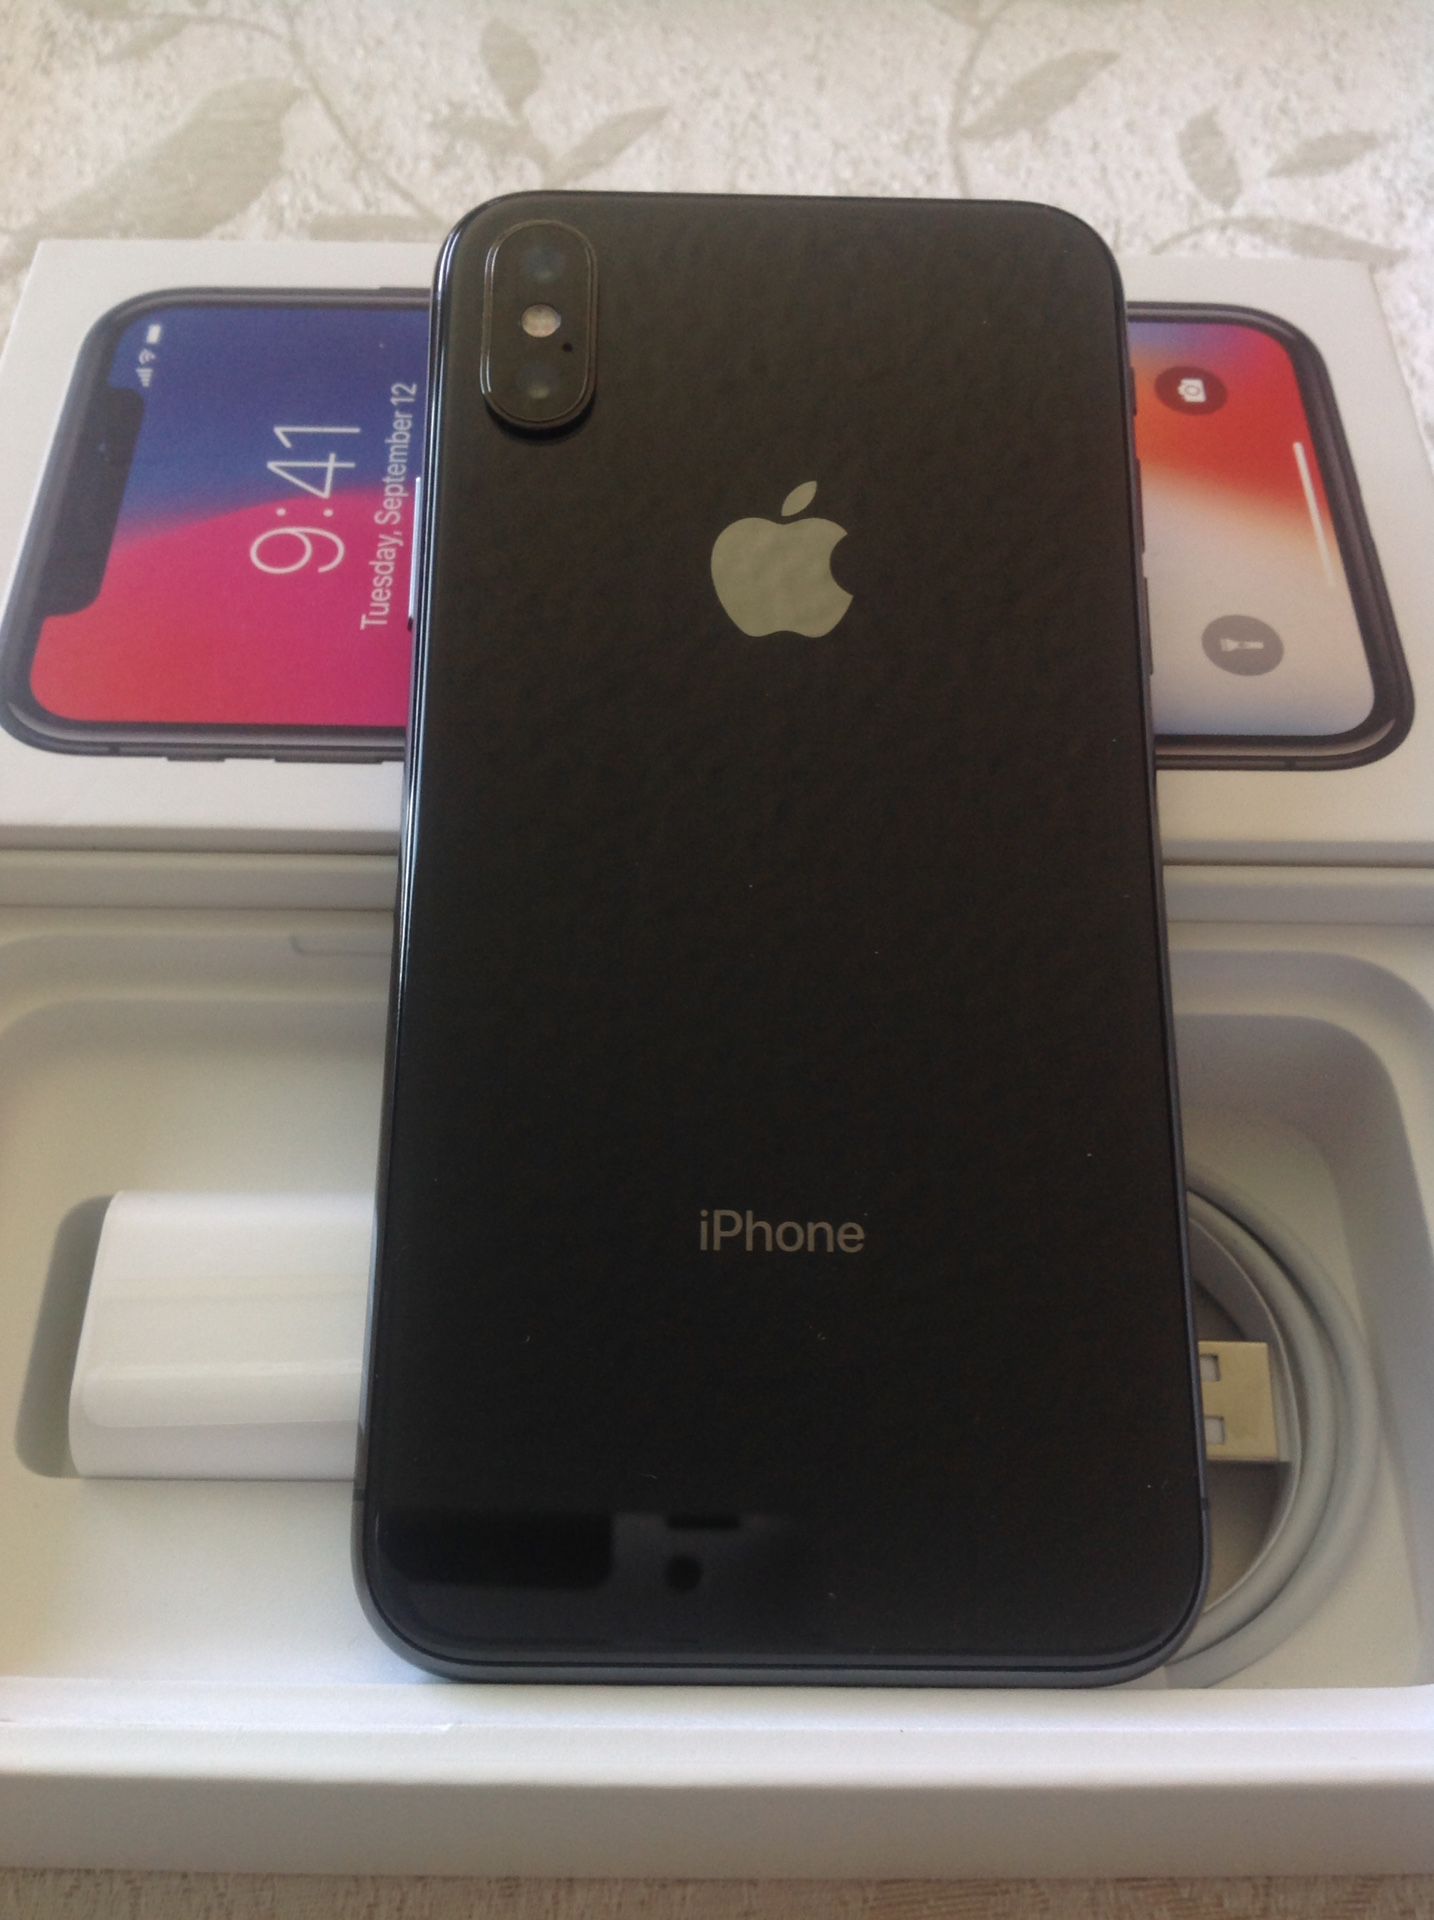 Apple iPhone X 64GB (T-MOBILE) UNLOCKED $450 FIRM